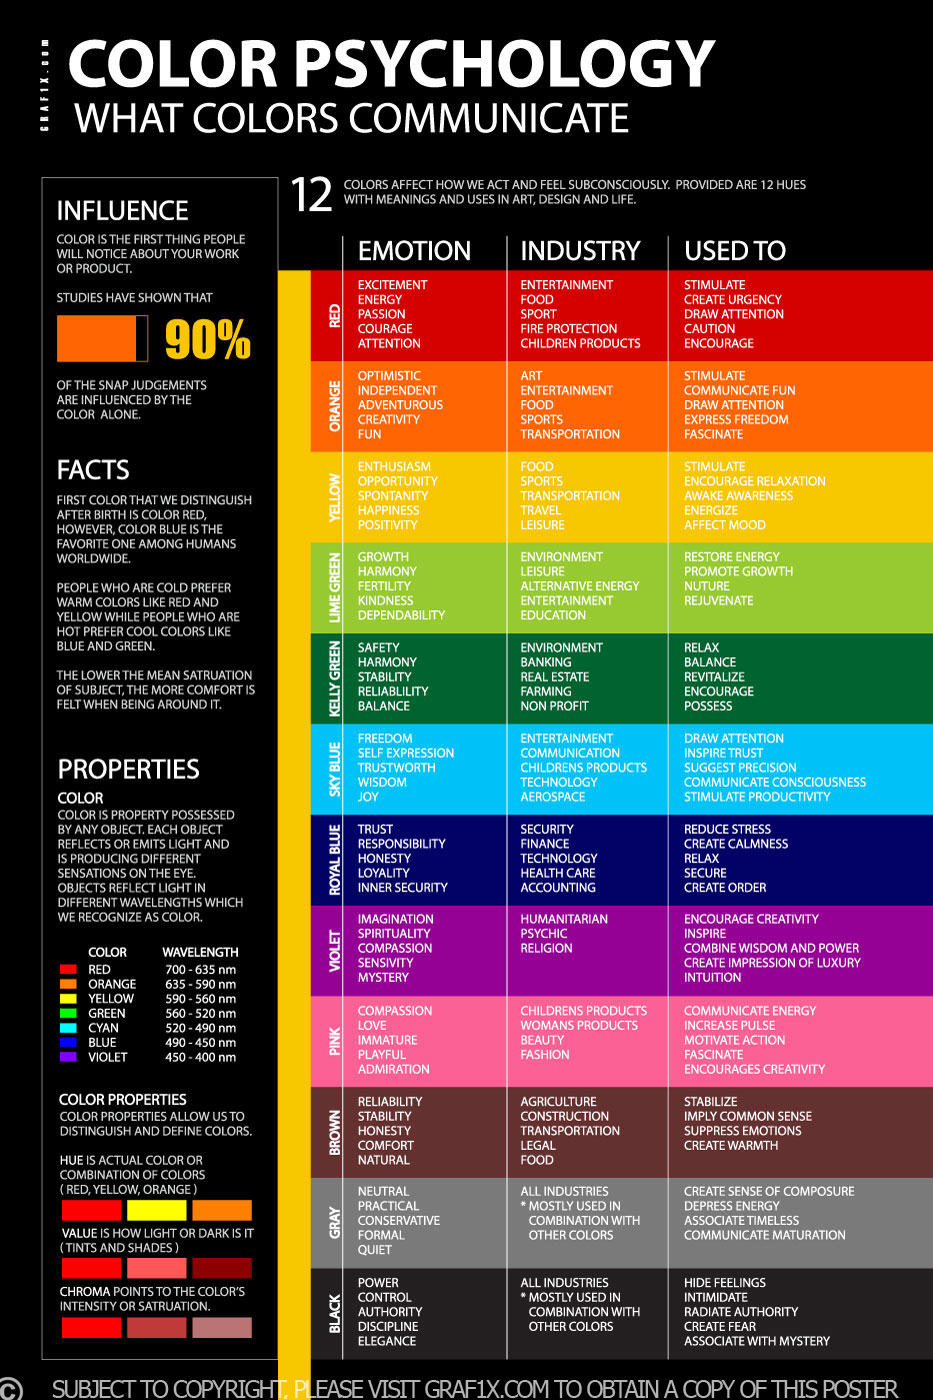 Color Meaning and Psychology